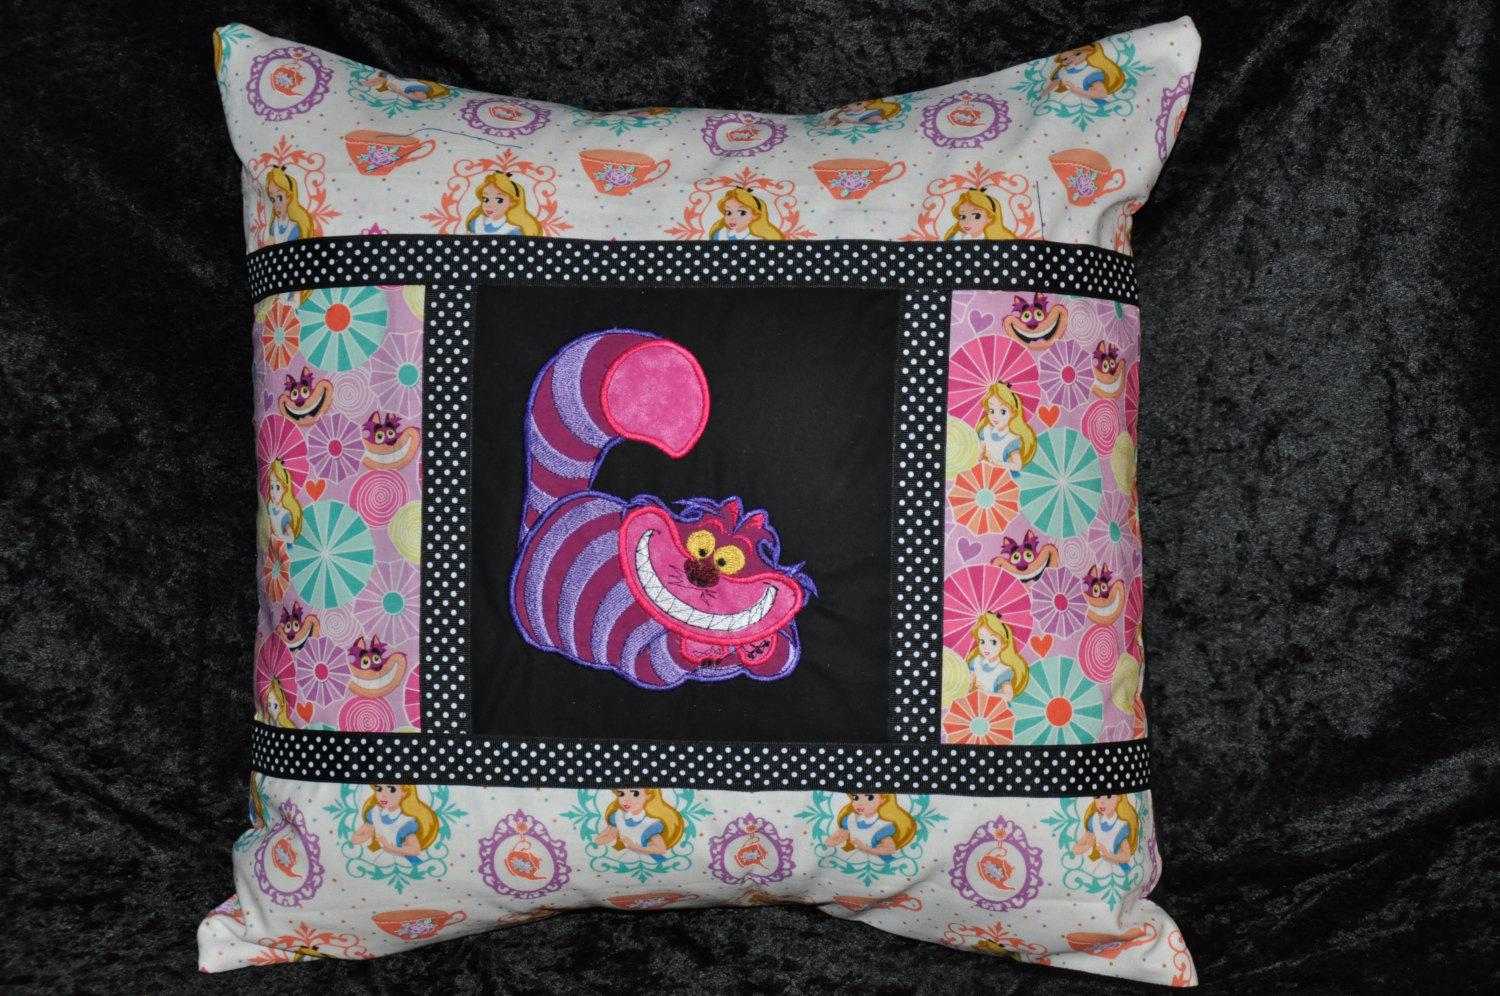 Cheshire Cat embroidered toile decorative home dec pillow